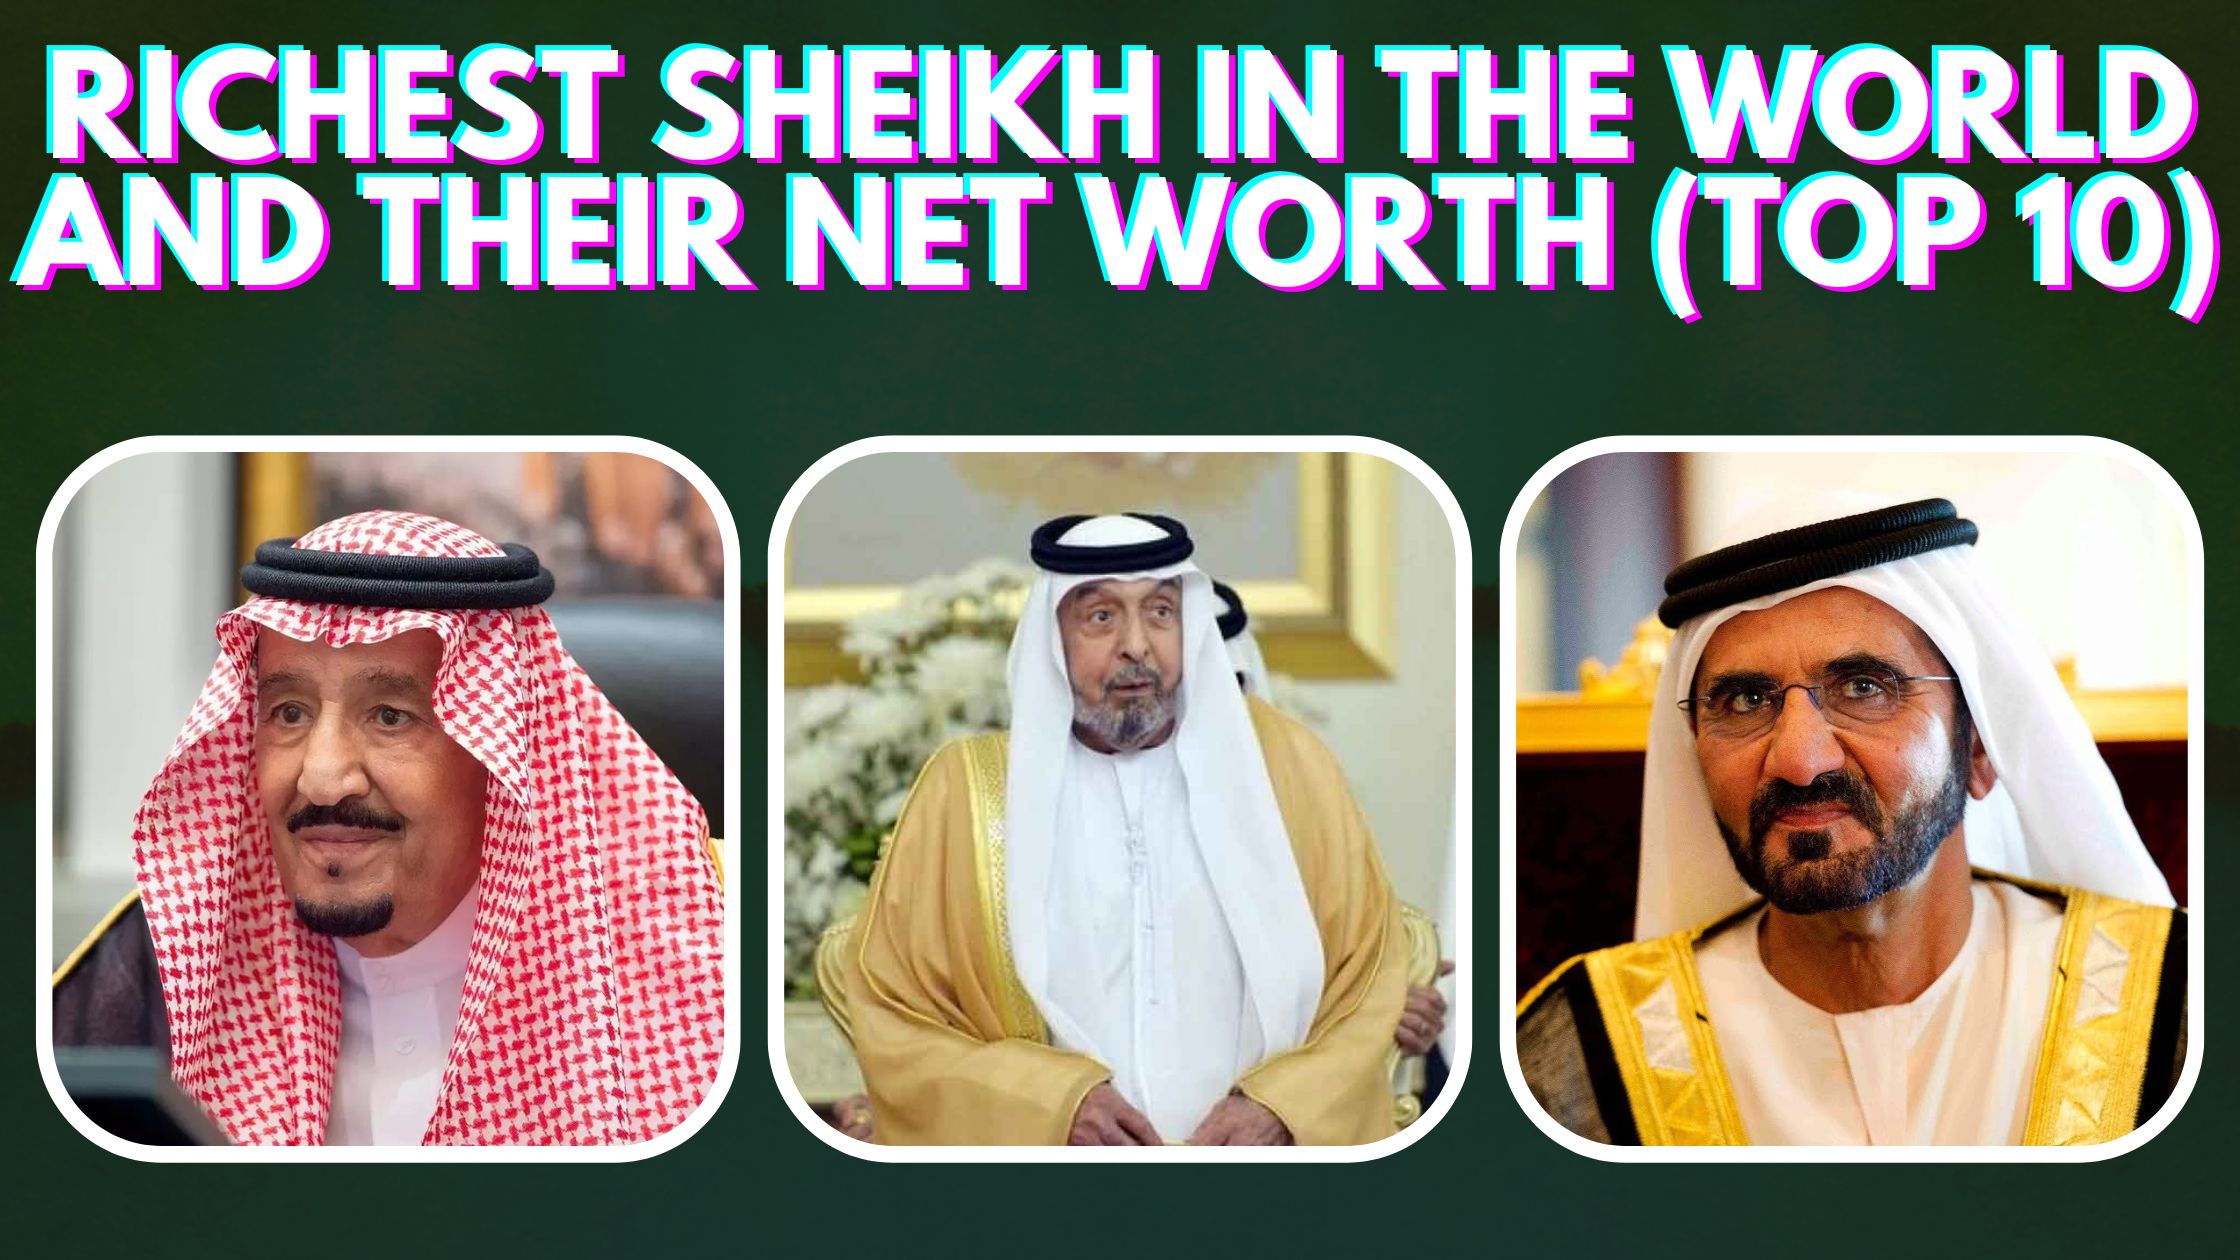 Top 10 Richest Sheikh in the World and Their Net Worth